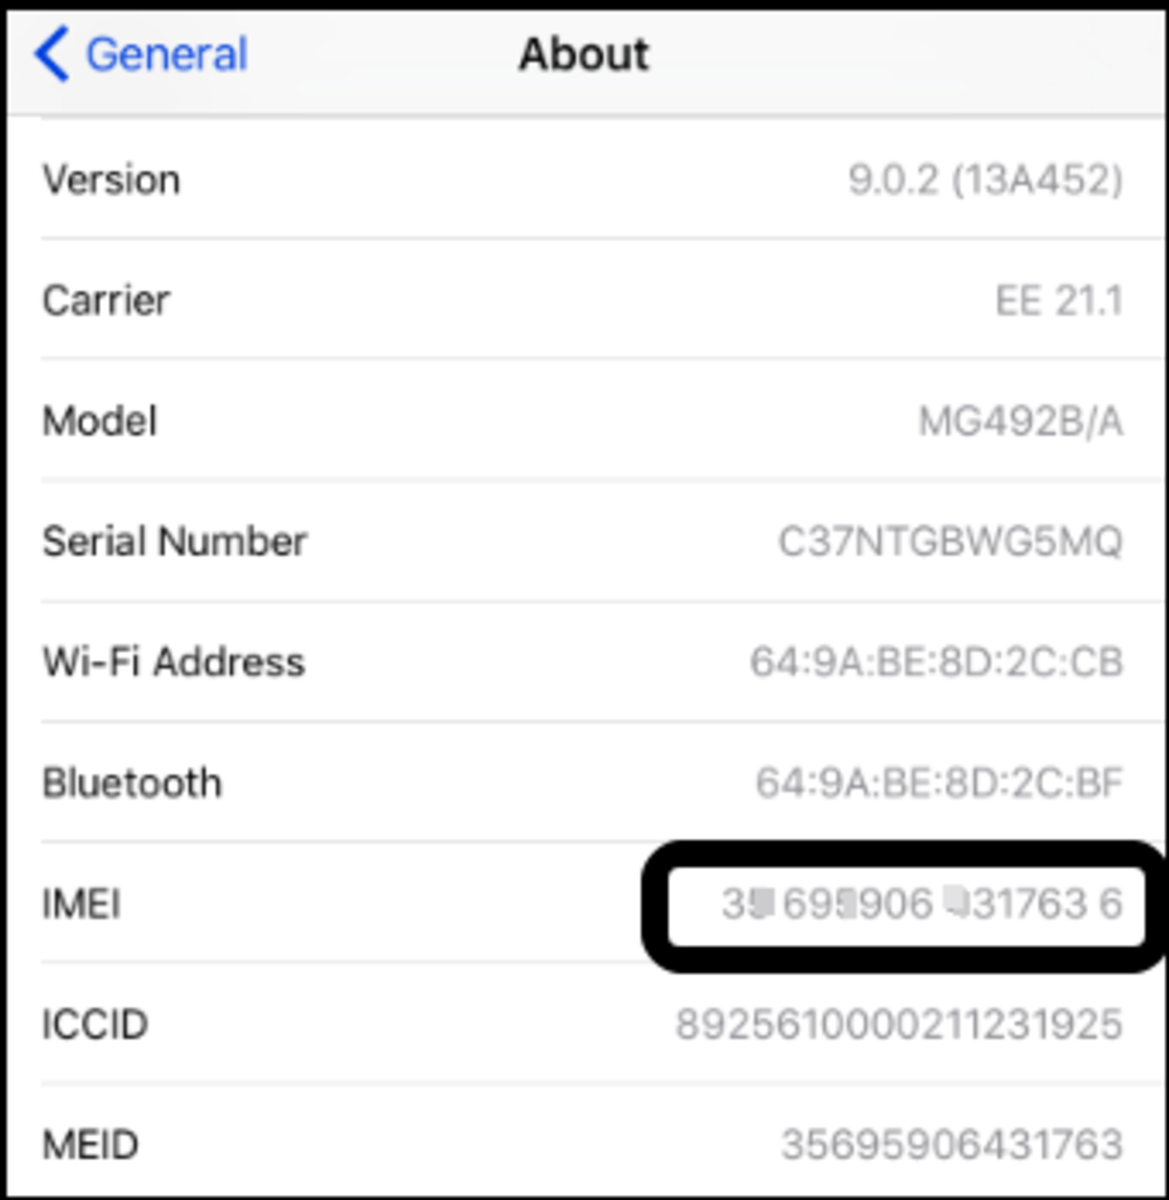 The iPhone IMEI number